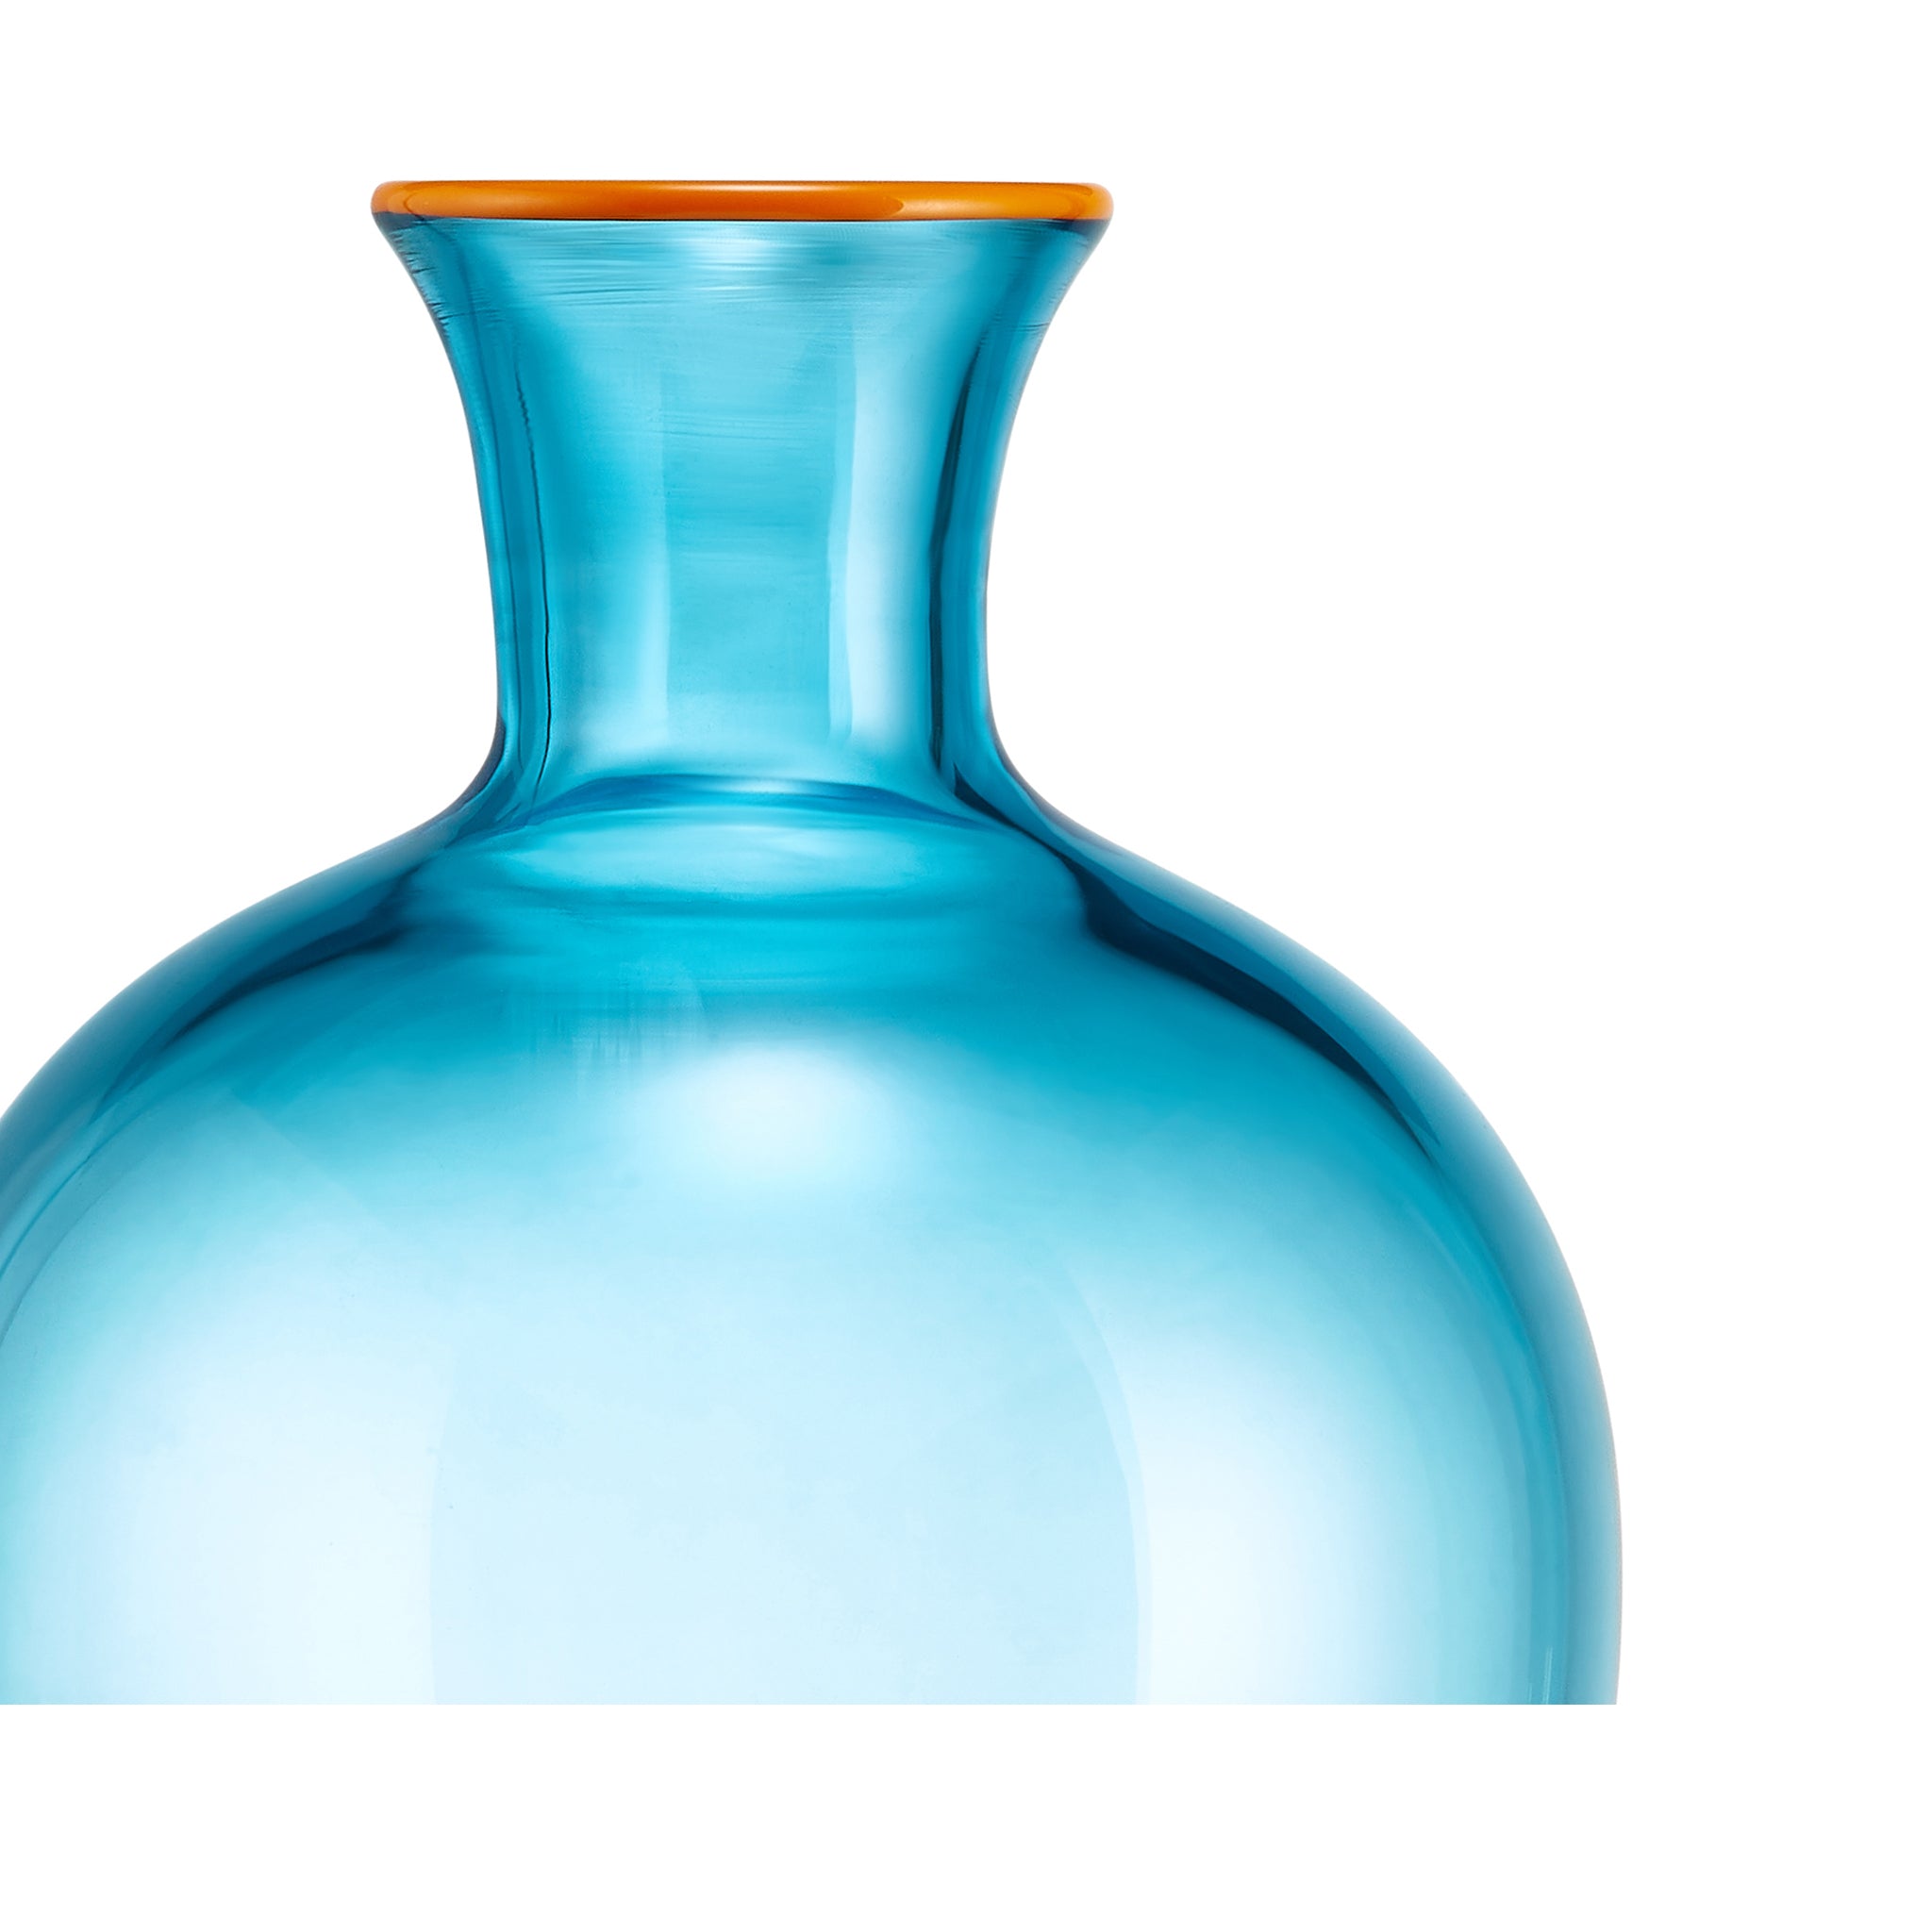 Handblown Glass Bumba Bedside Carafe and Glass Set in Turquoise with Orange Rim, 0.5L